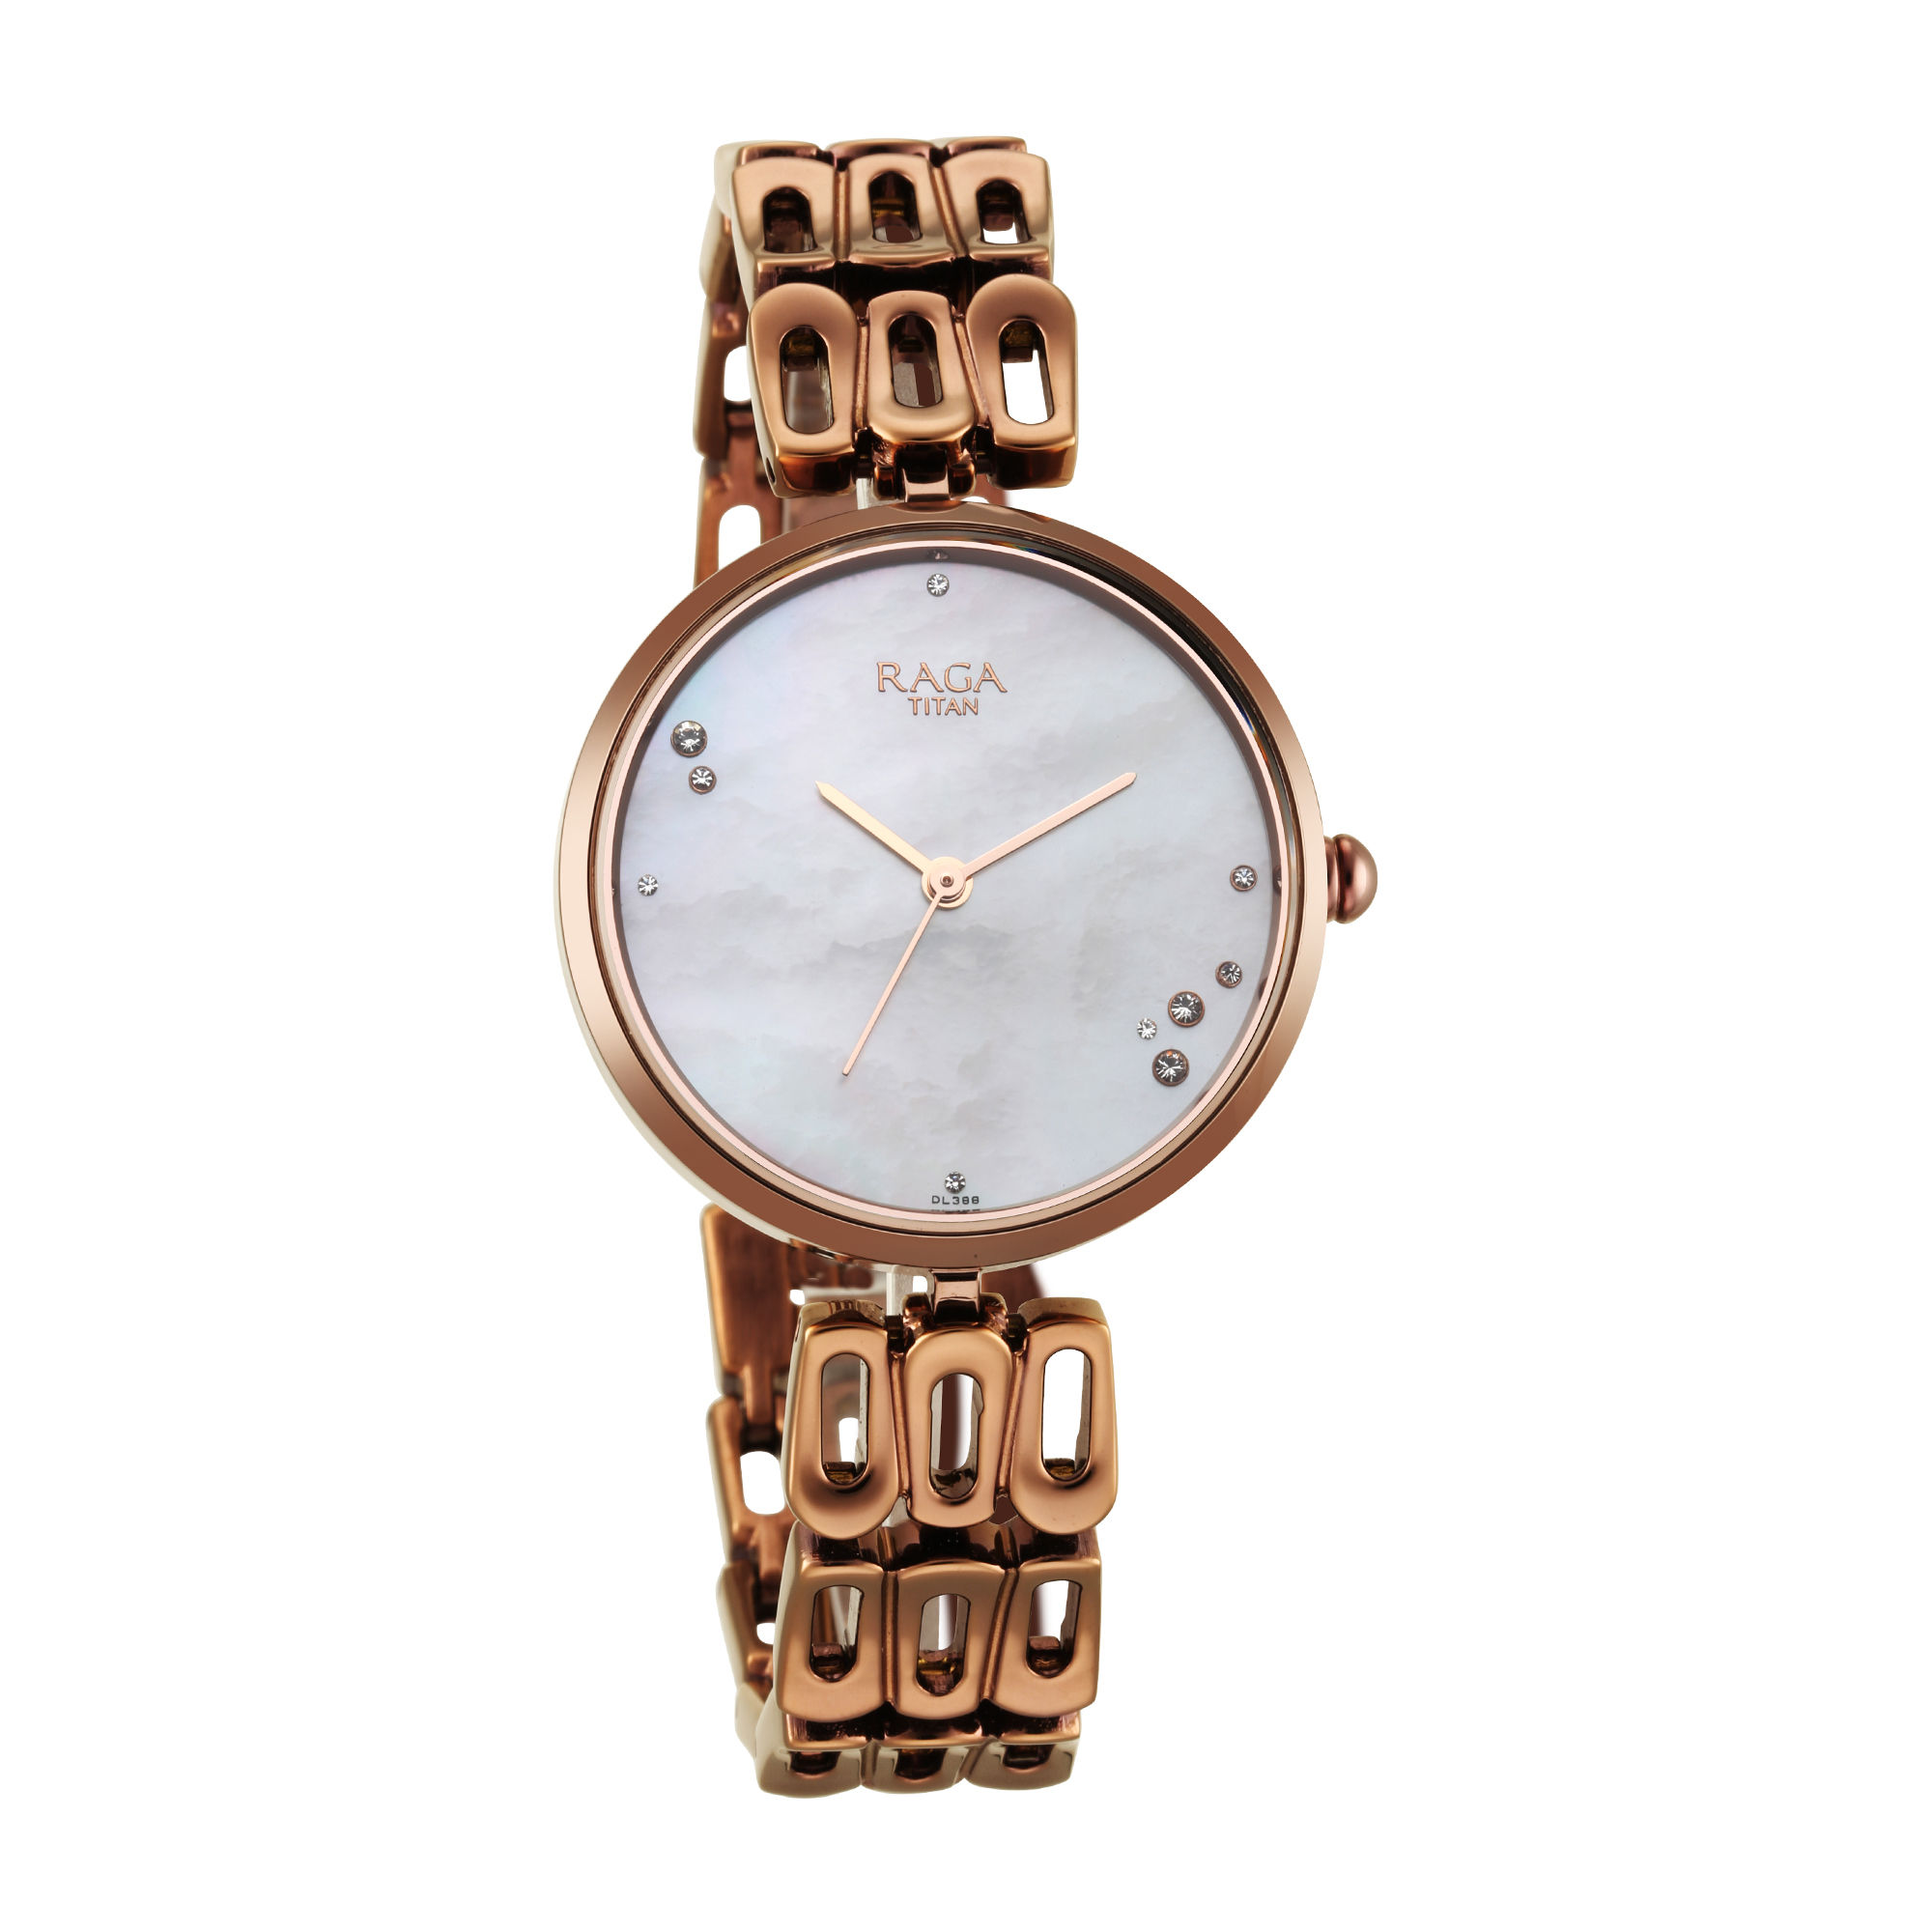 Titan Raga Chic Analog Mother of Pearl Dial Watch for Women 2659QM01